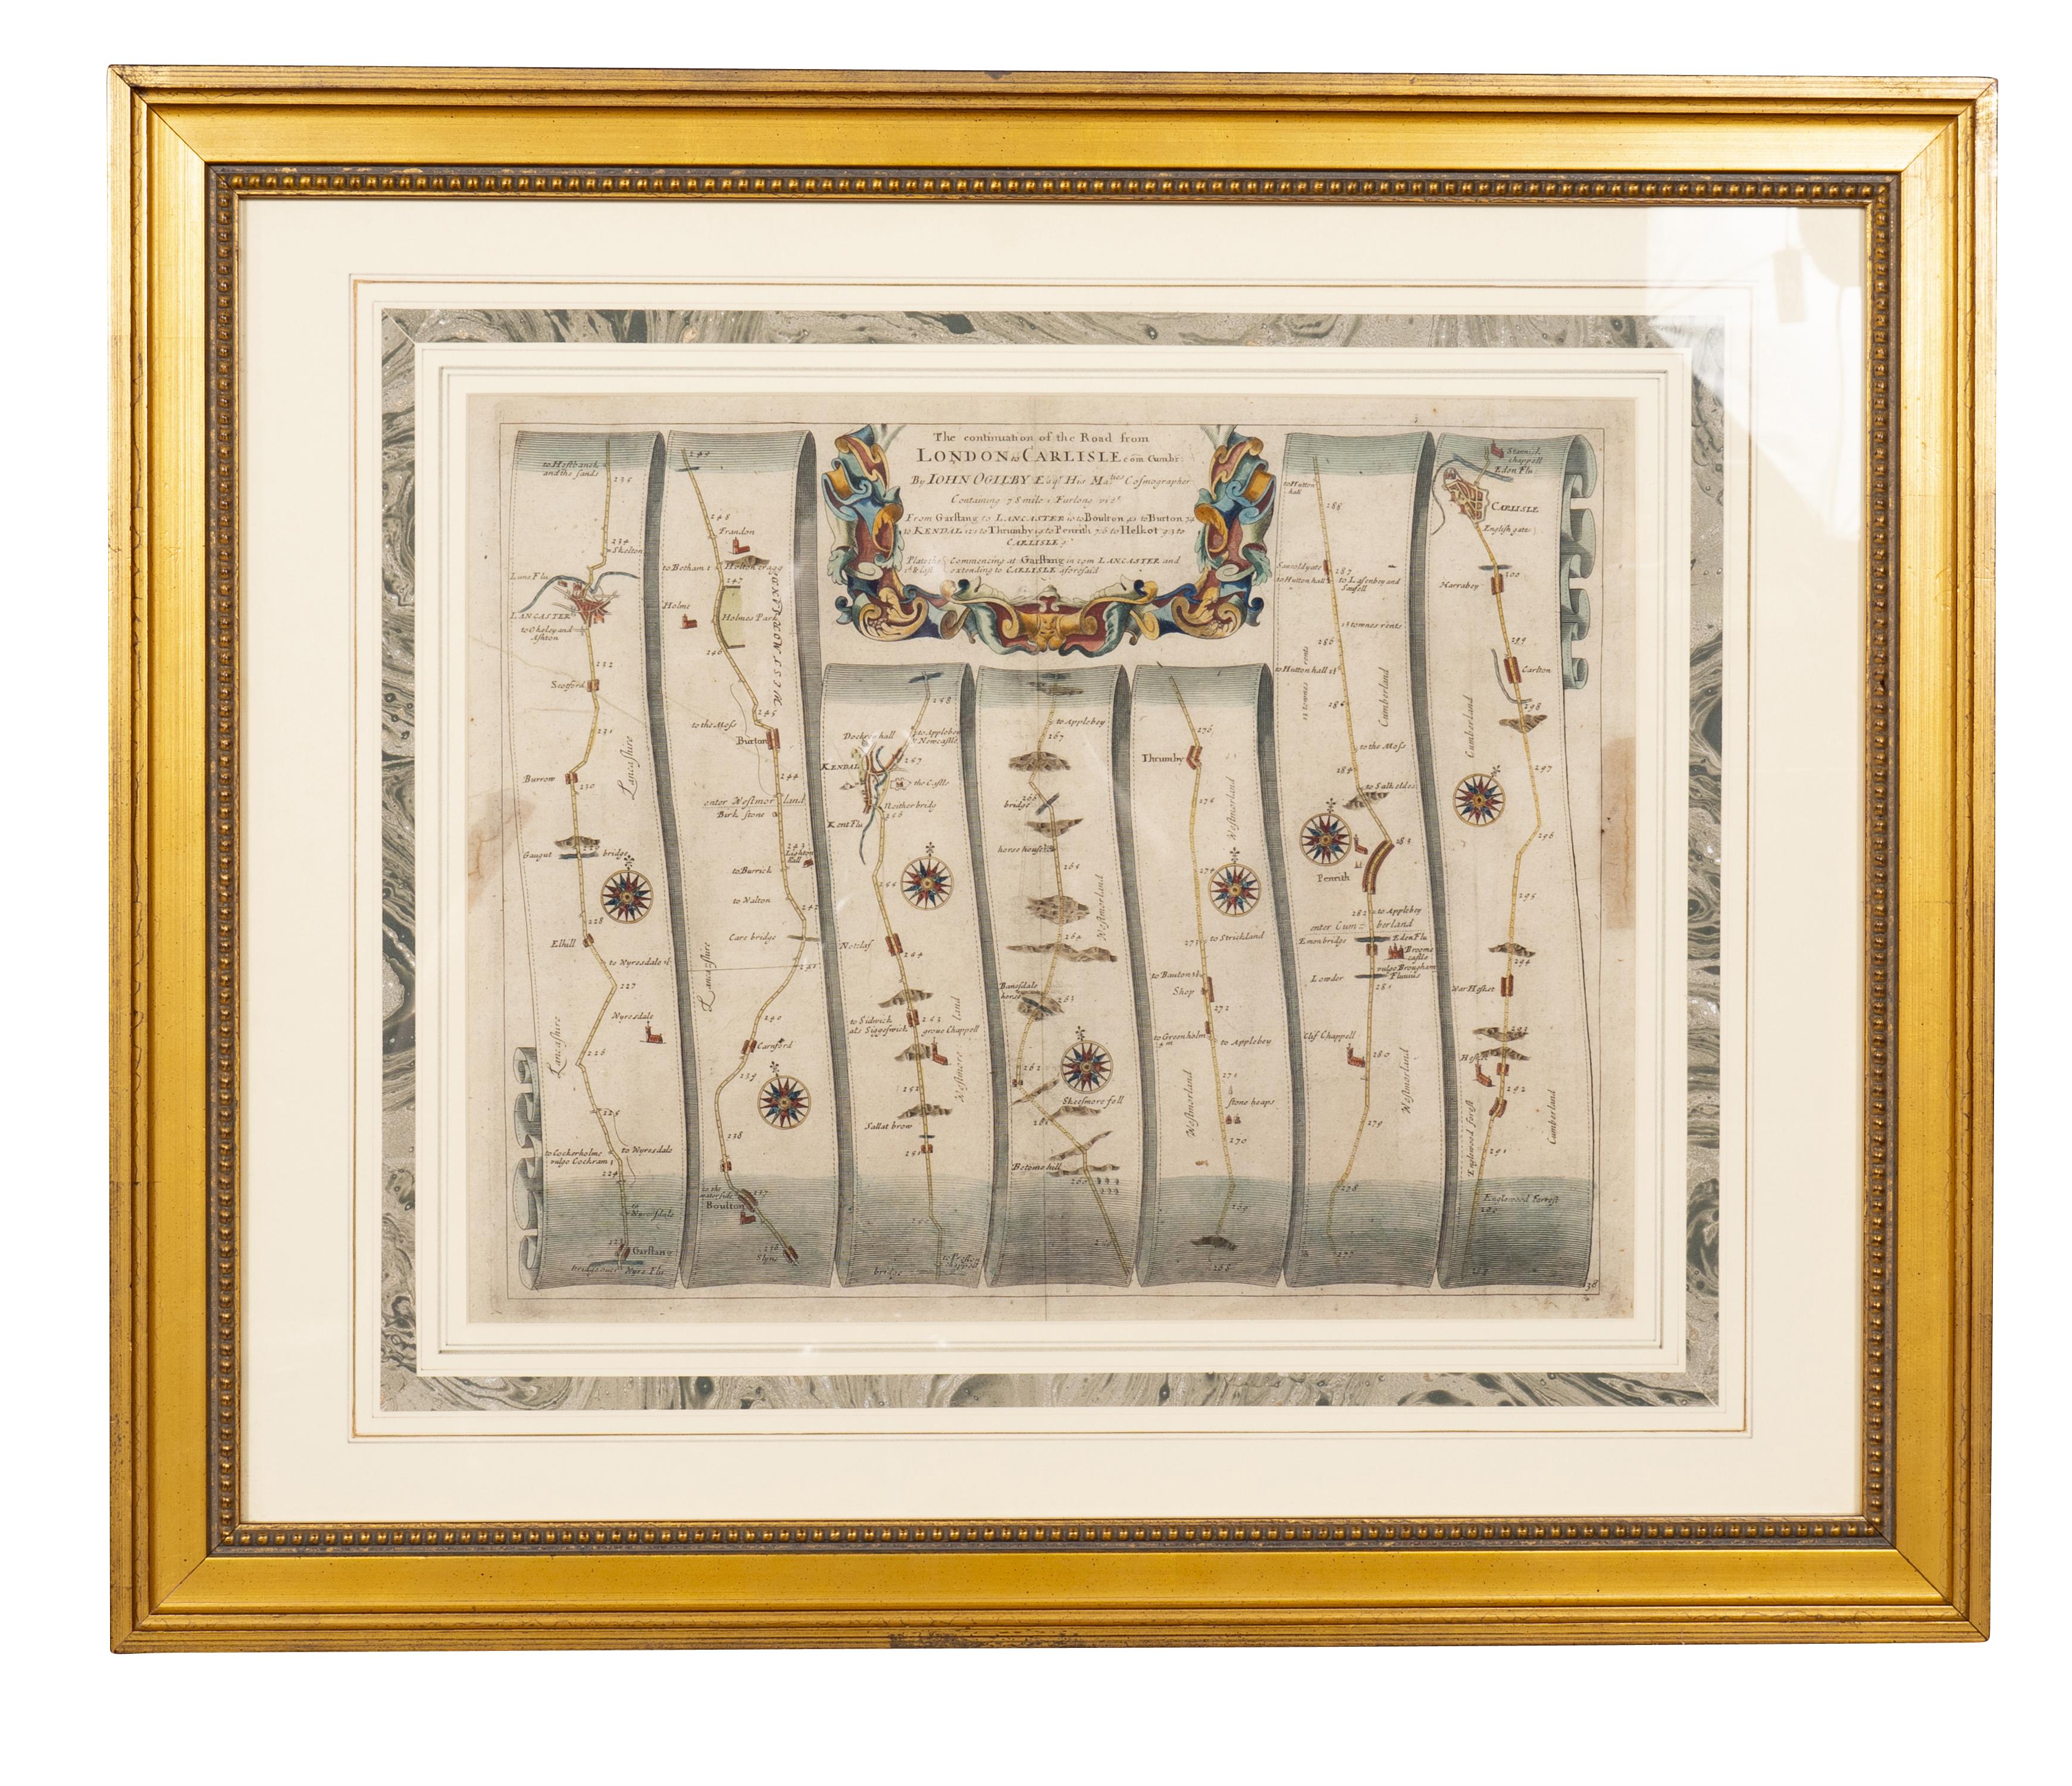 The first road maps of England. London to Holyhead and London to Carlisle. Nicely framed and matted. These are plates removed from a book. These are first editions printed in the late 17th century.